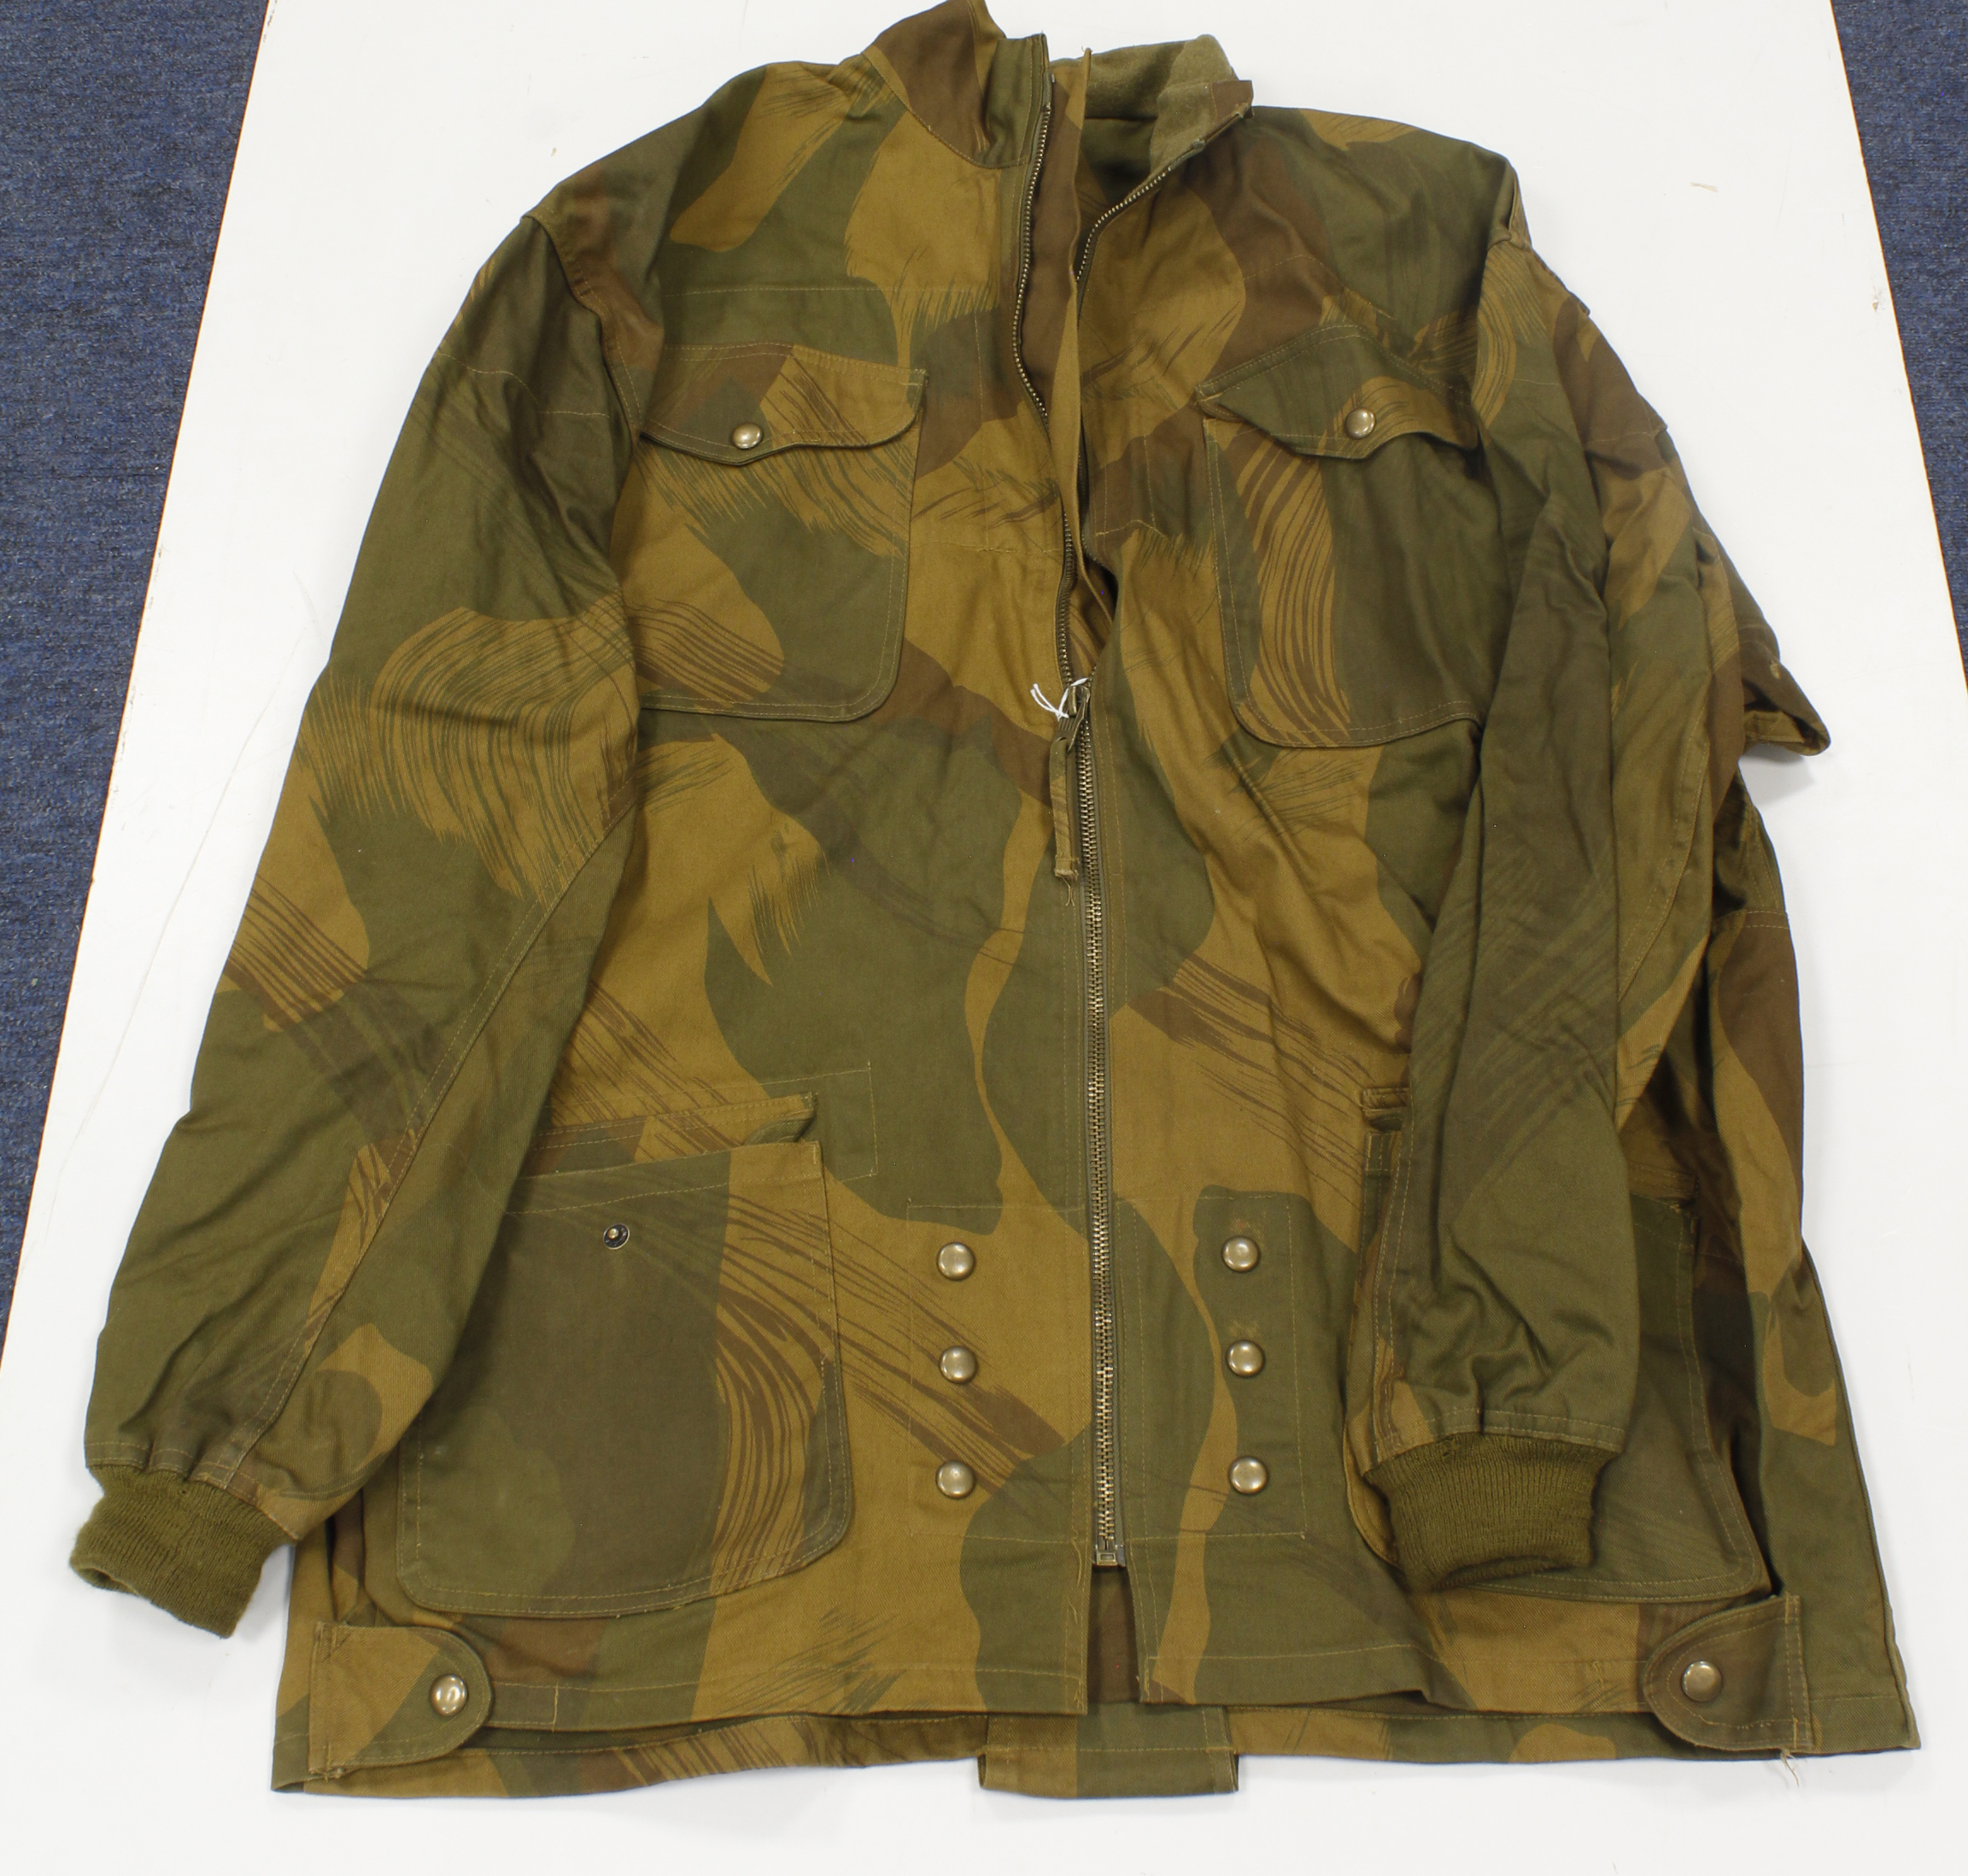 WW2 Parachute Regiment Denison smock large size with full length zip as issued to officers